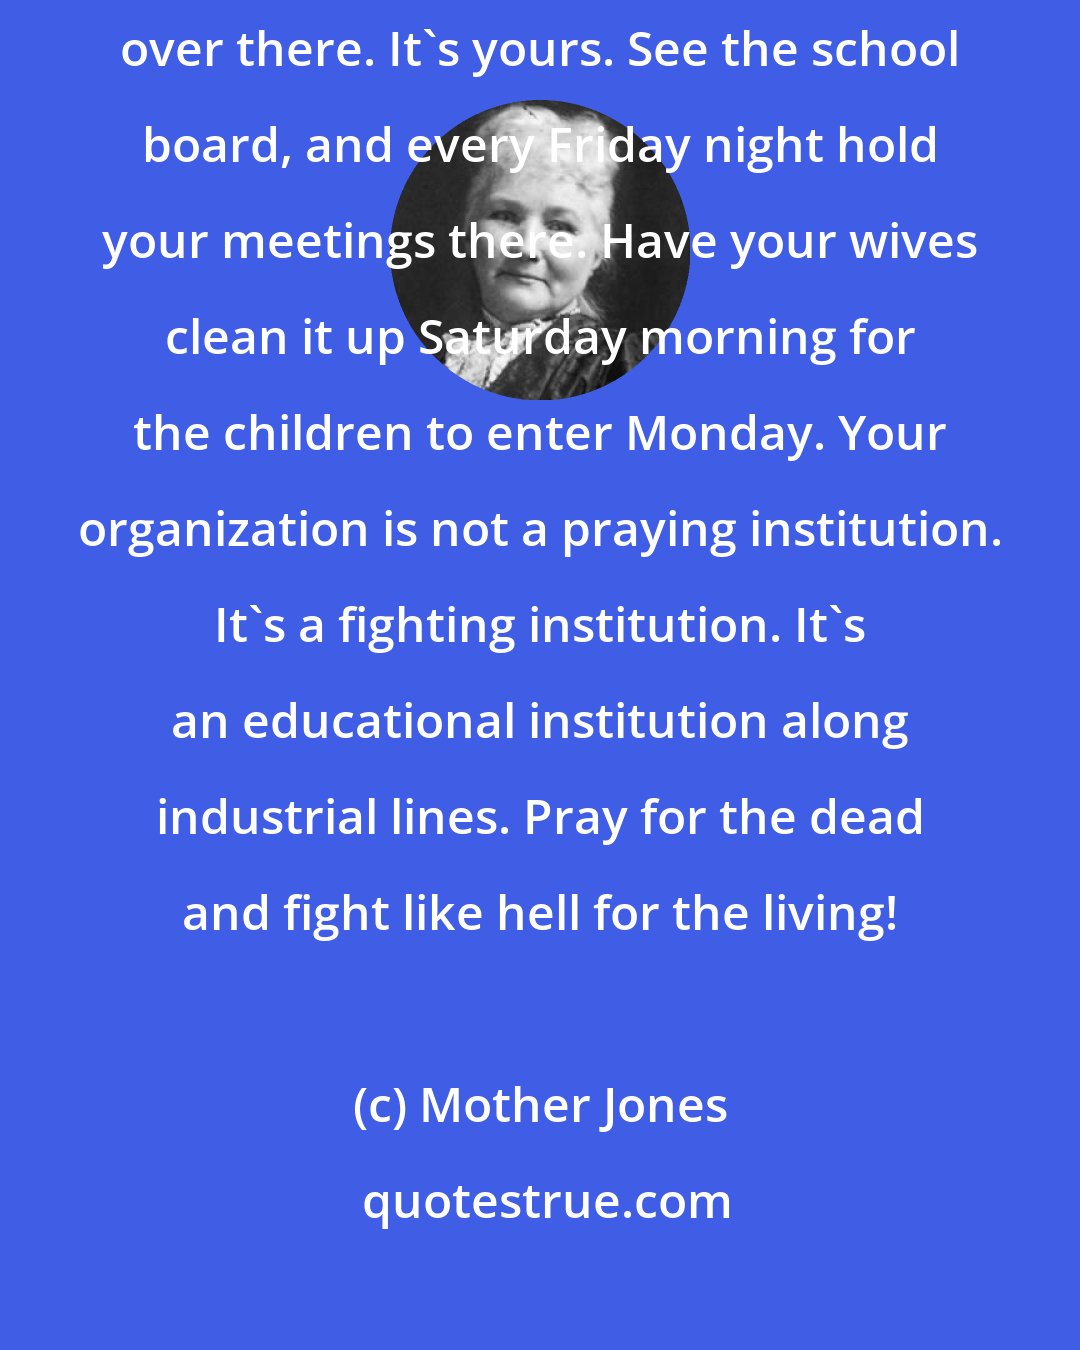 Mother Jones: Your ancestors fought for you to have a share in that institution over there. It's yours. See the school board, and every Friday night hold your meetings there. Have your wives clean it up Saturday morning for the children to enter Monday. Your organization is not a praying institution. It's a fighting institution. It's an educational institution along industrial lines. Pray for the dead and fight like hell for the living!